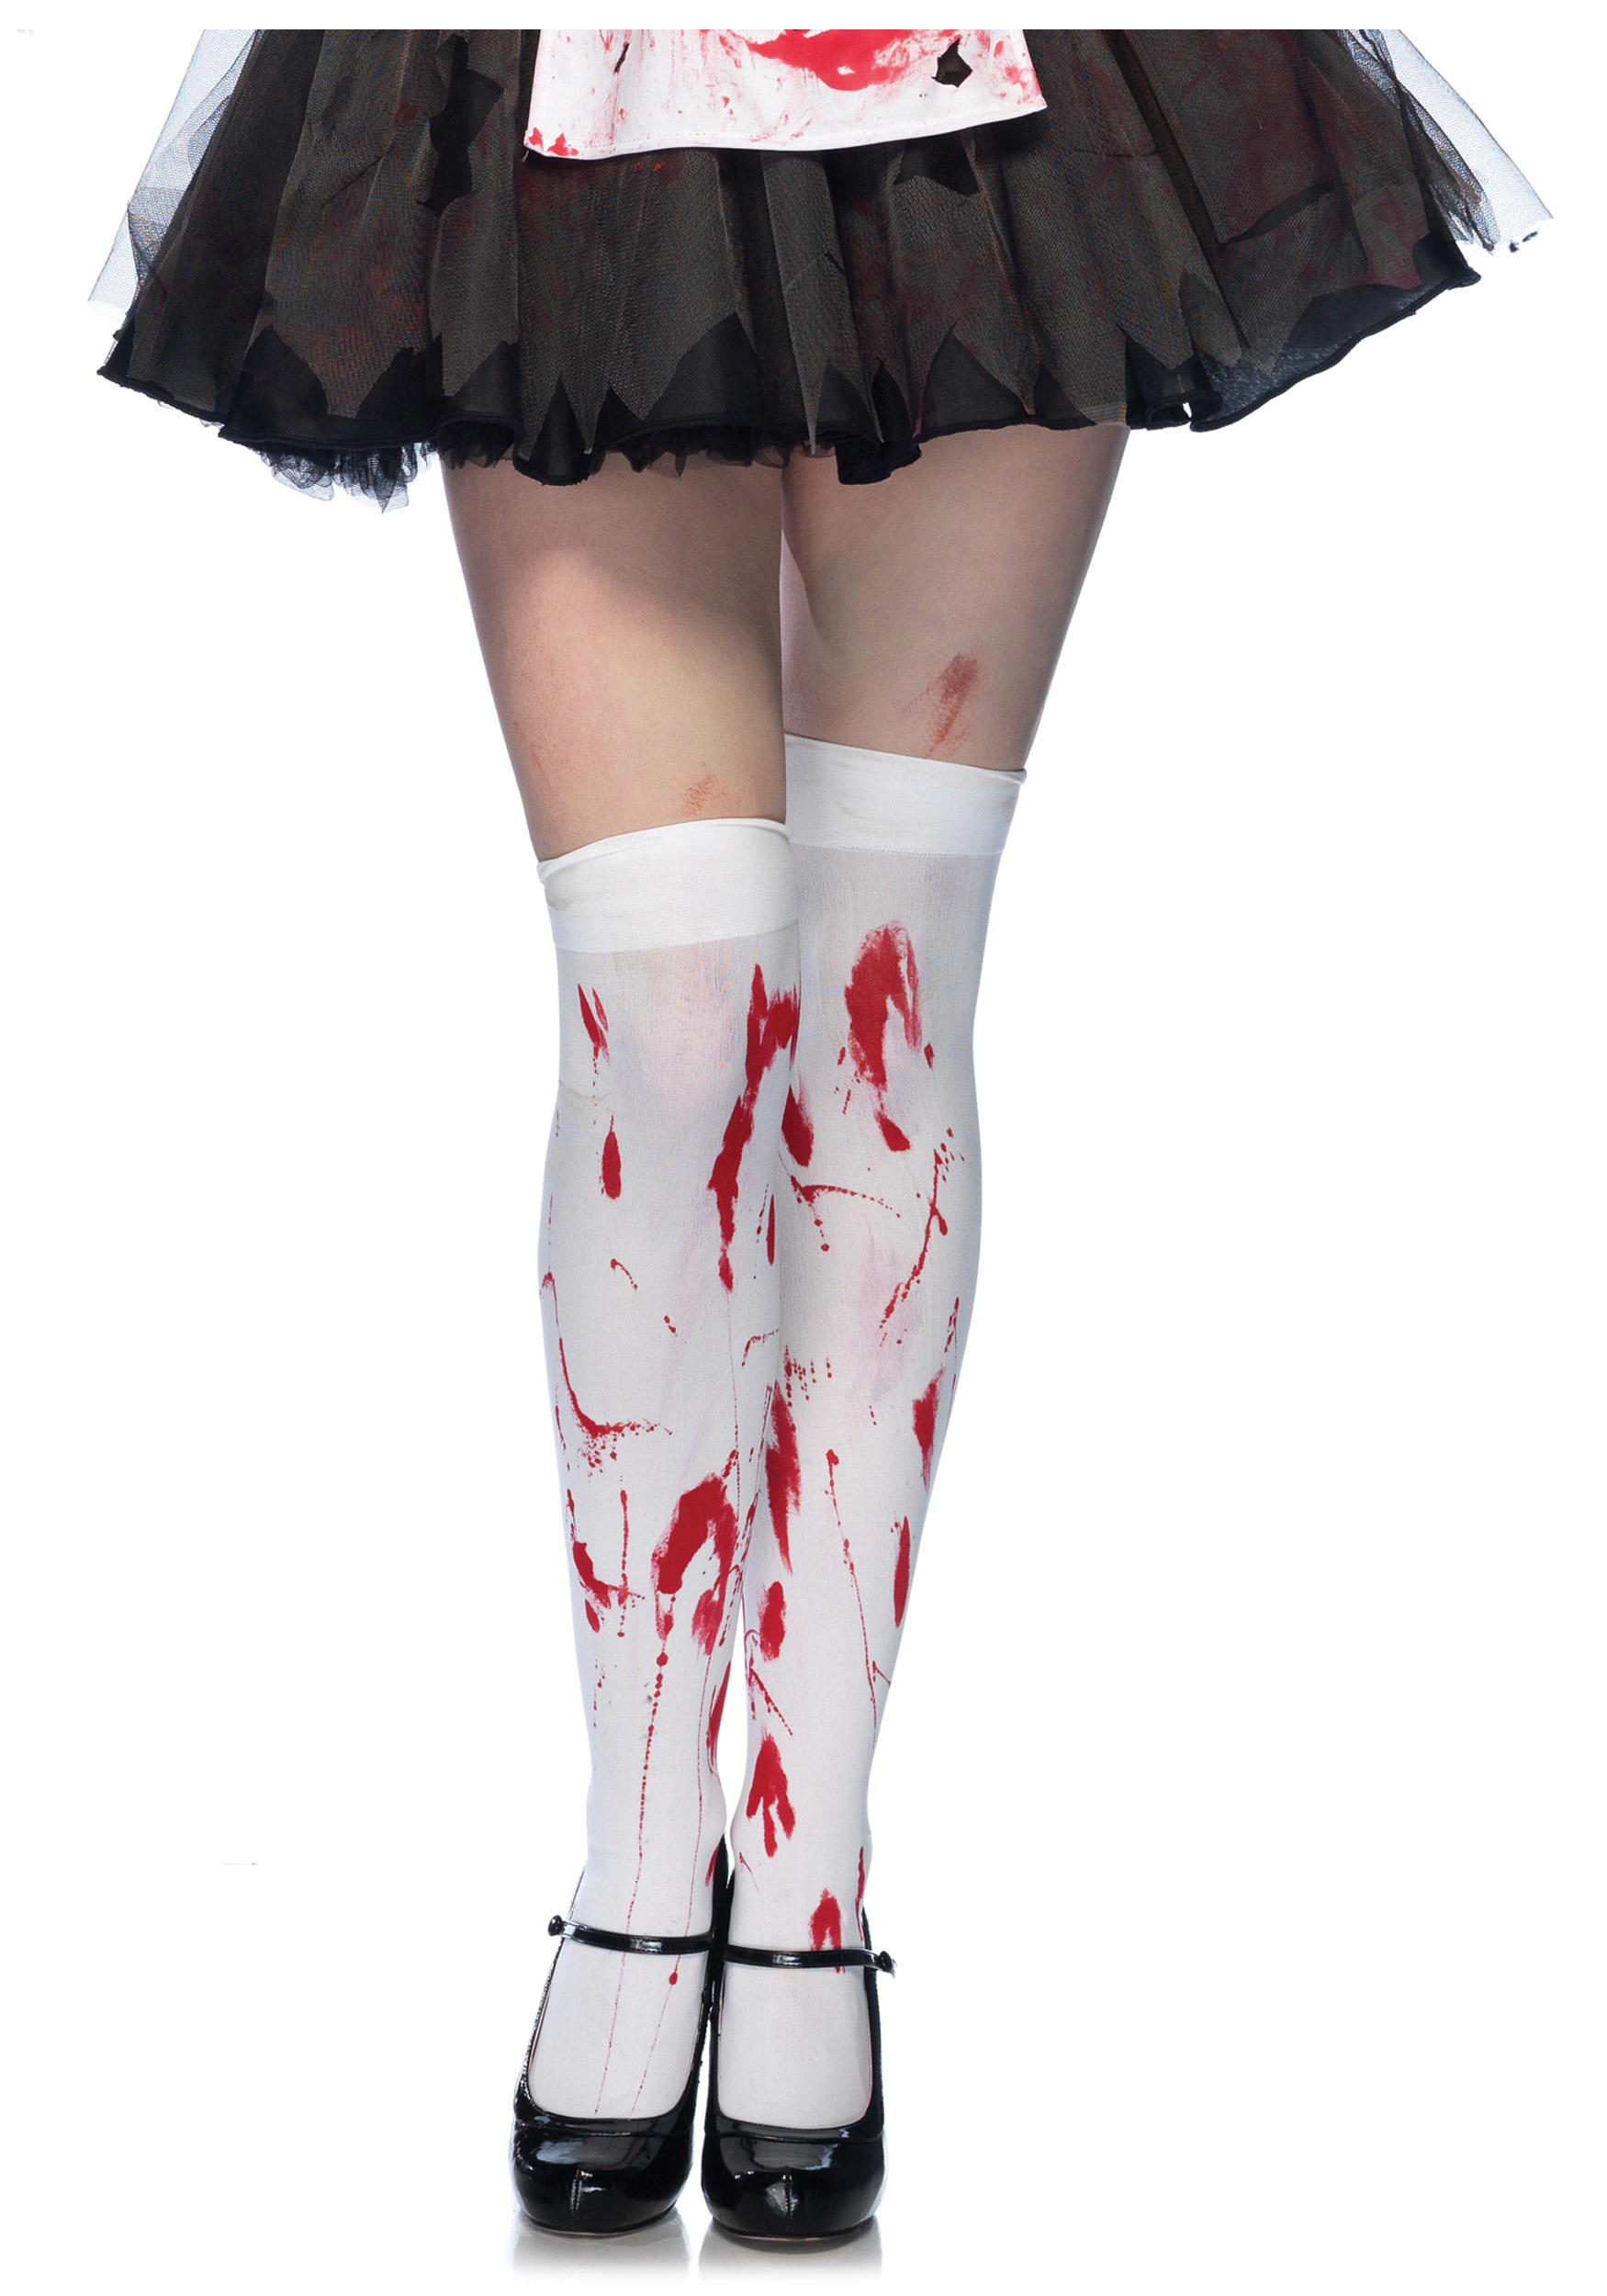 Bloody Thigh High Womens Stockings